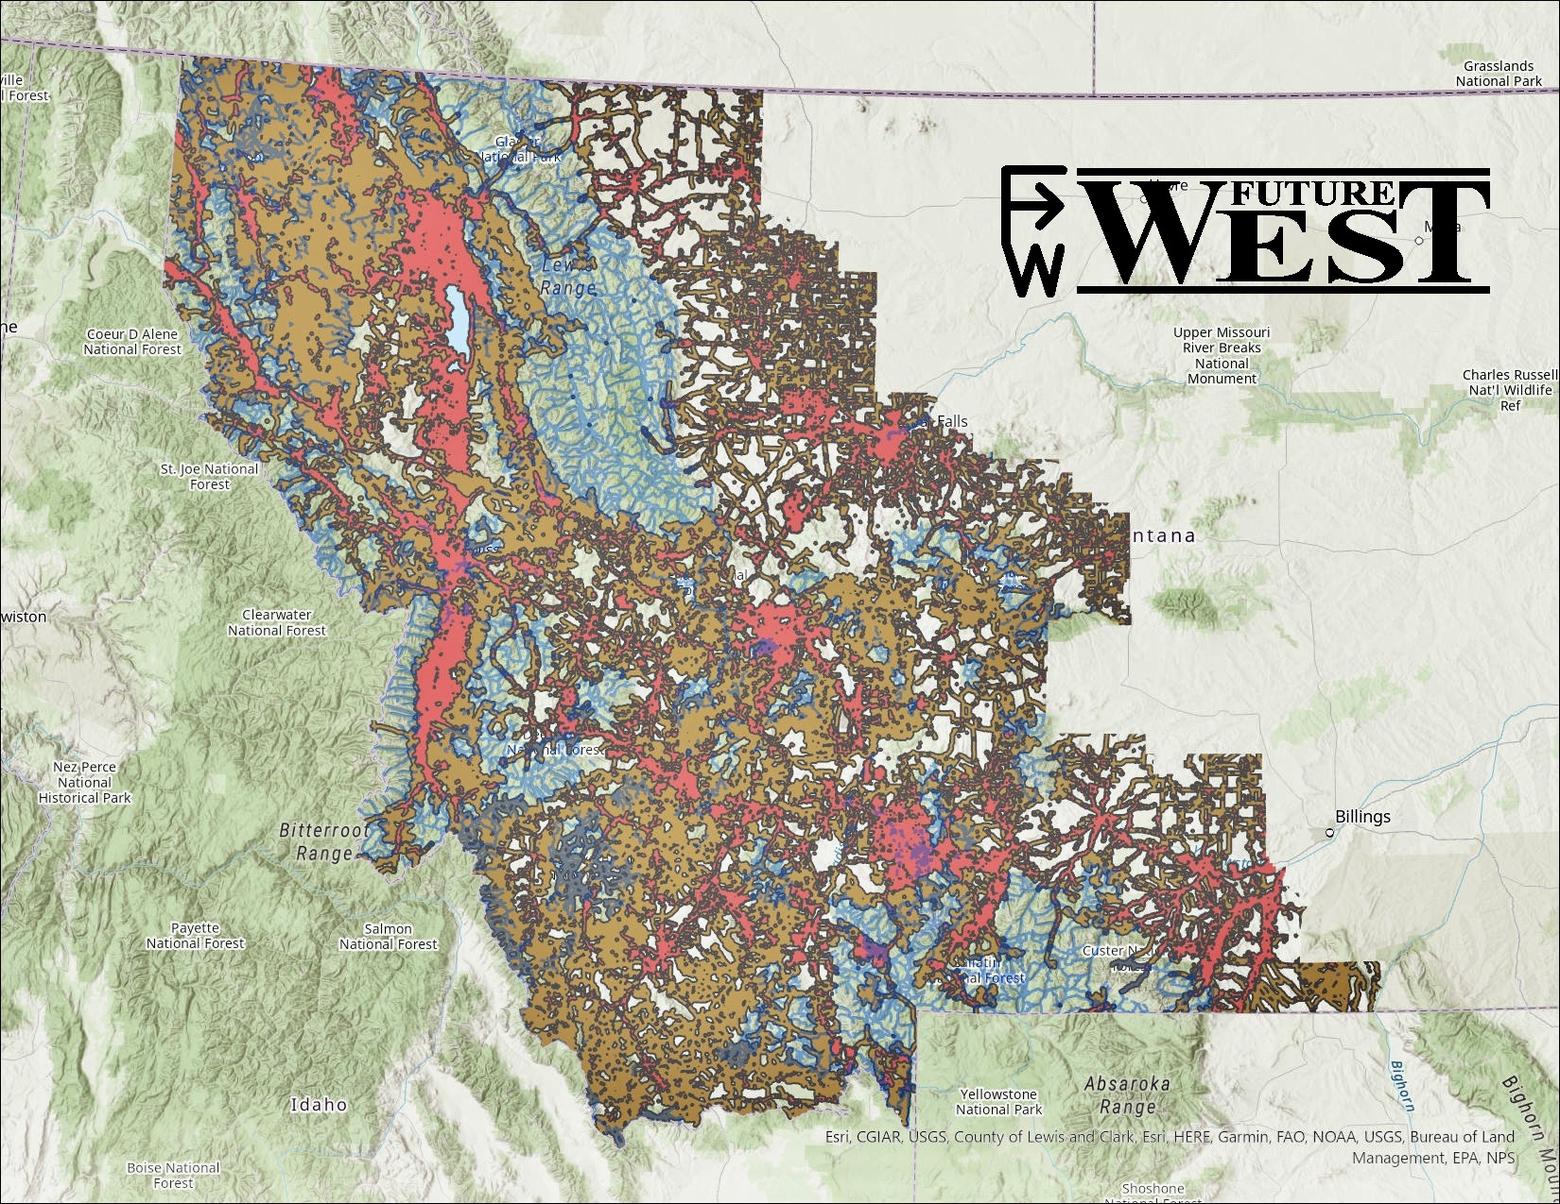 A Rorschach test for public land managers and elected officials in Montana? No, it's an "elk disturbance map" created by landscape biologist Brent Brock with Future West. It shows the disturbance footprint created by human activity that wildlife avoid or exhibit high levels of stress across western Montana and based on scientific studies. Home impacts are represented by reddish (salmon) color;  roads in brown and trails in blue. "The results indicate that the human disturbance footprint is pervasive across the majority of land in western Montana, including large roadless areas," Brock says. 